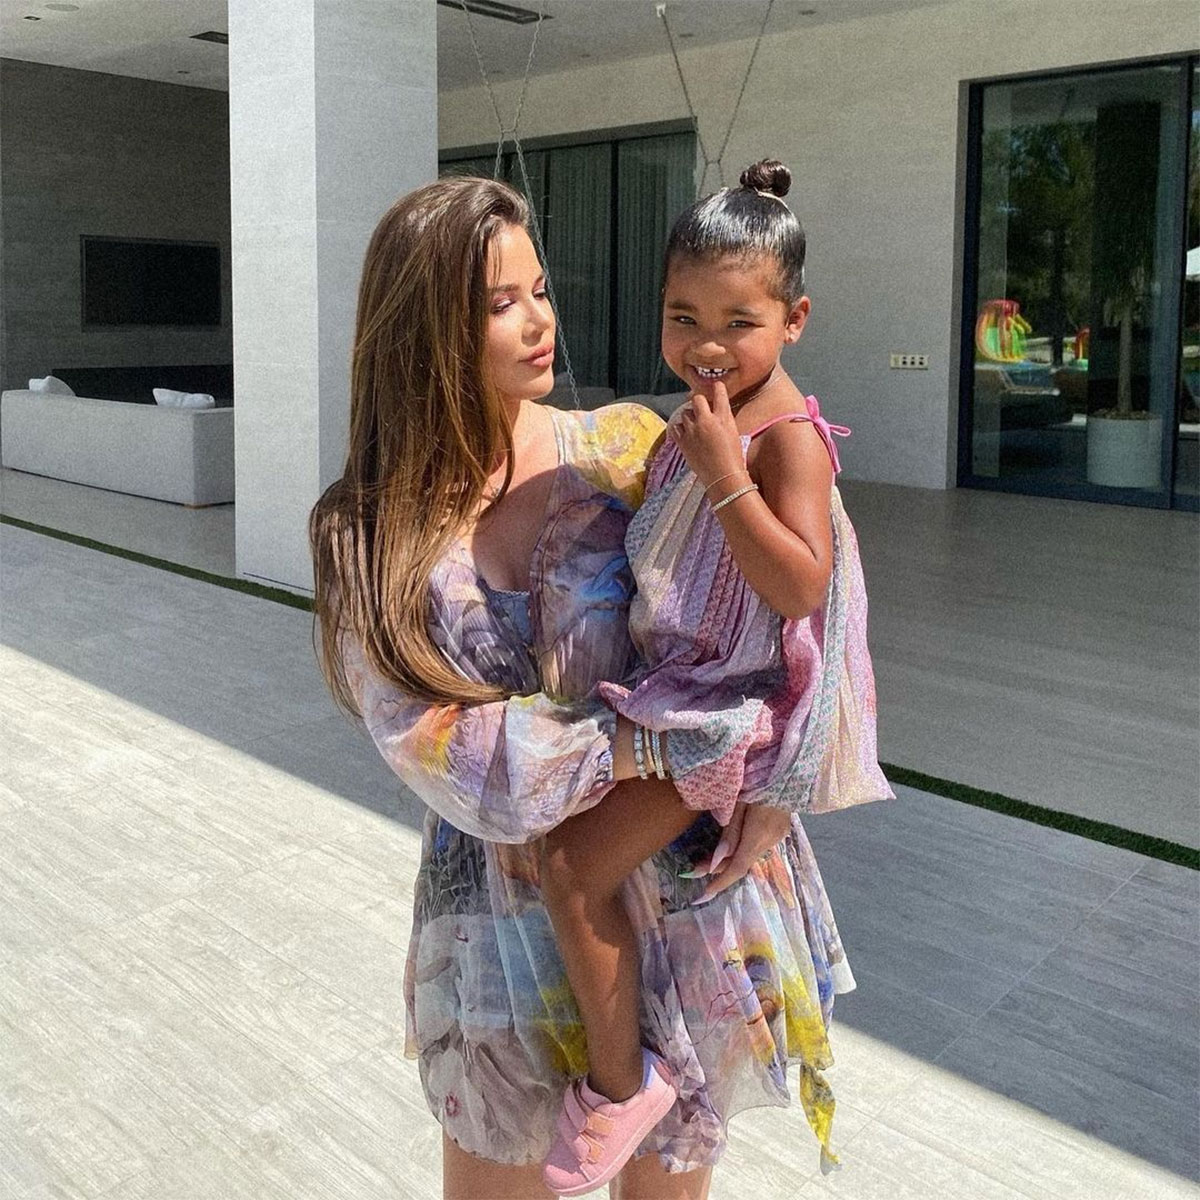 Khloe Kardashian Tells Haters to Leave Her Daughter True Alone